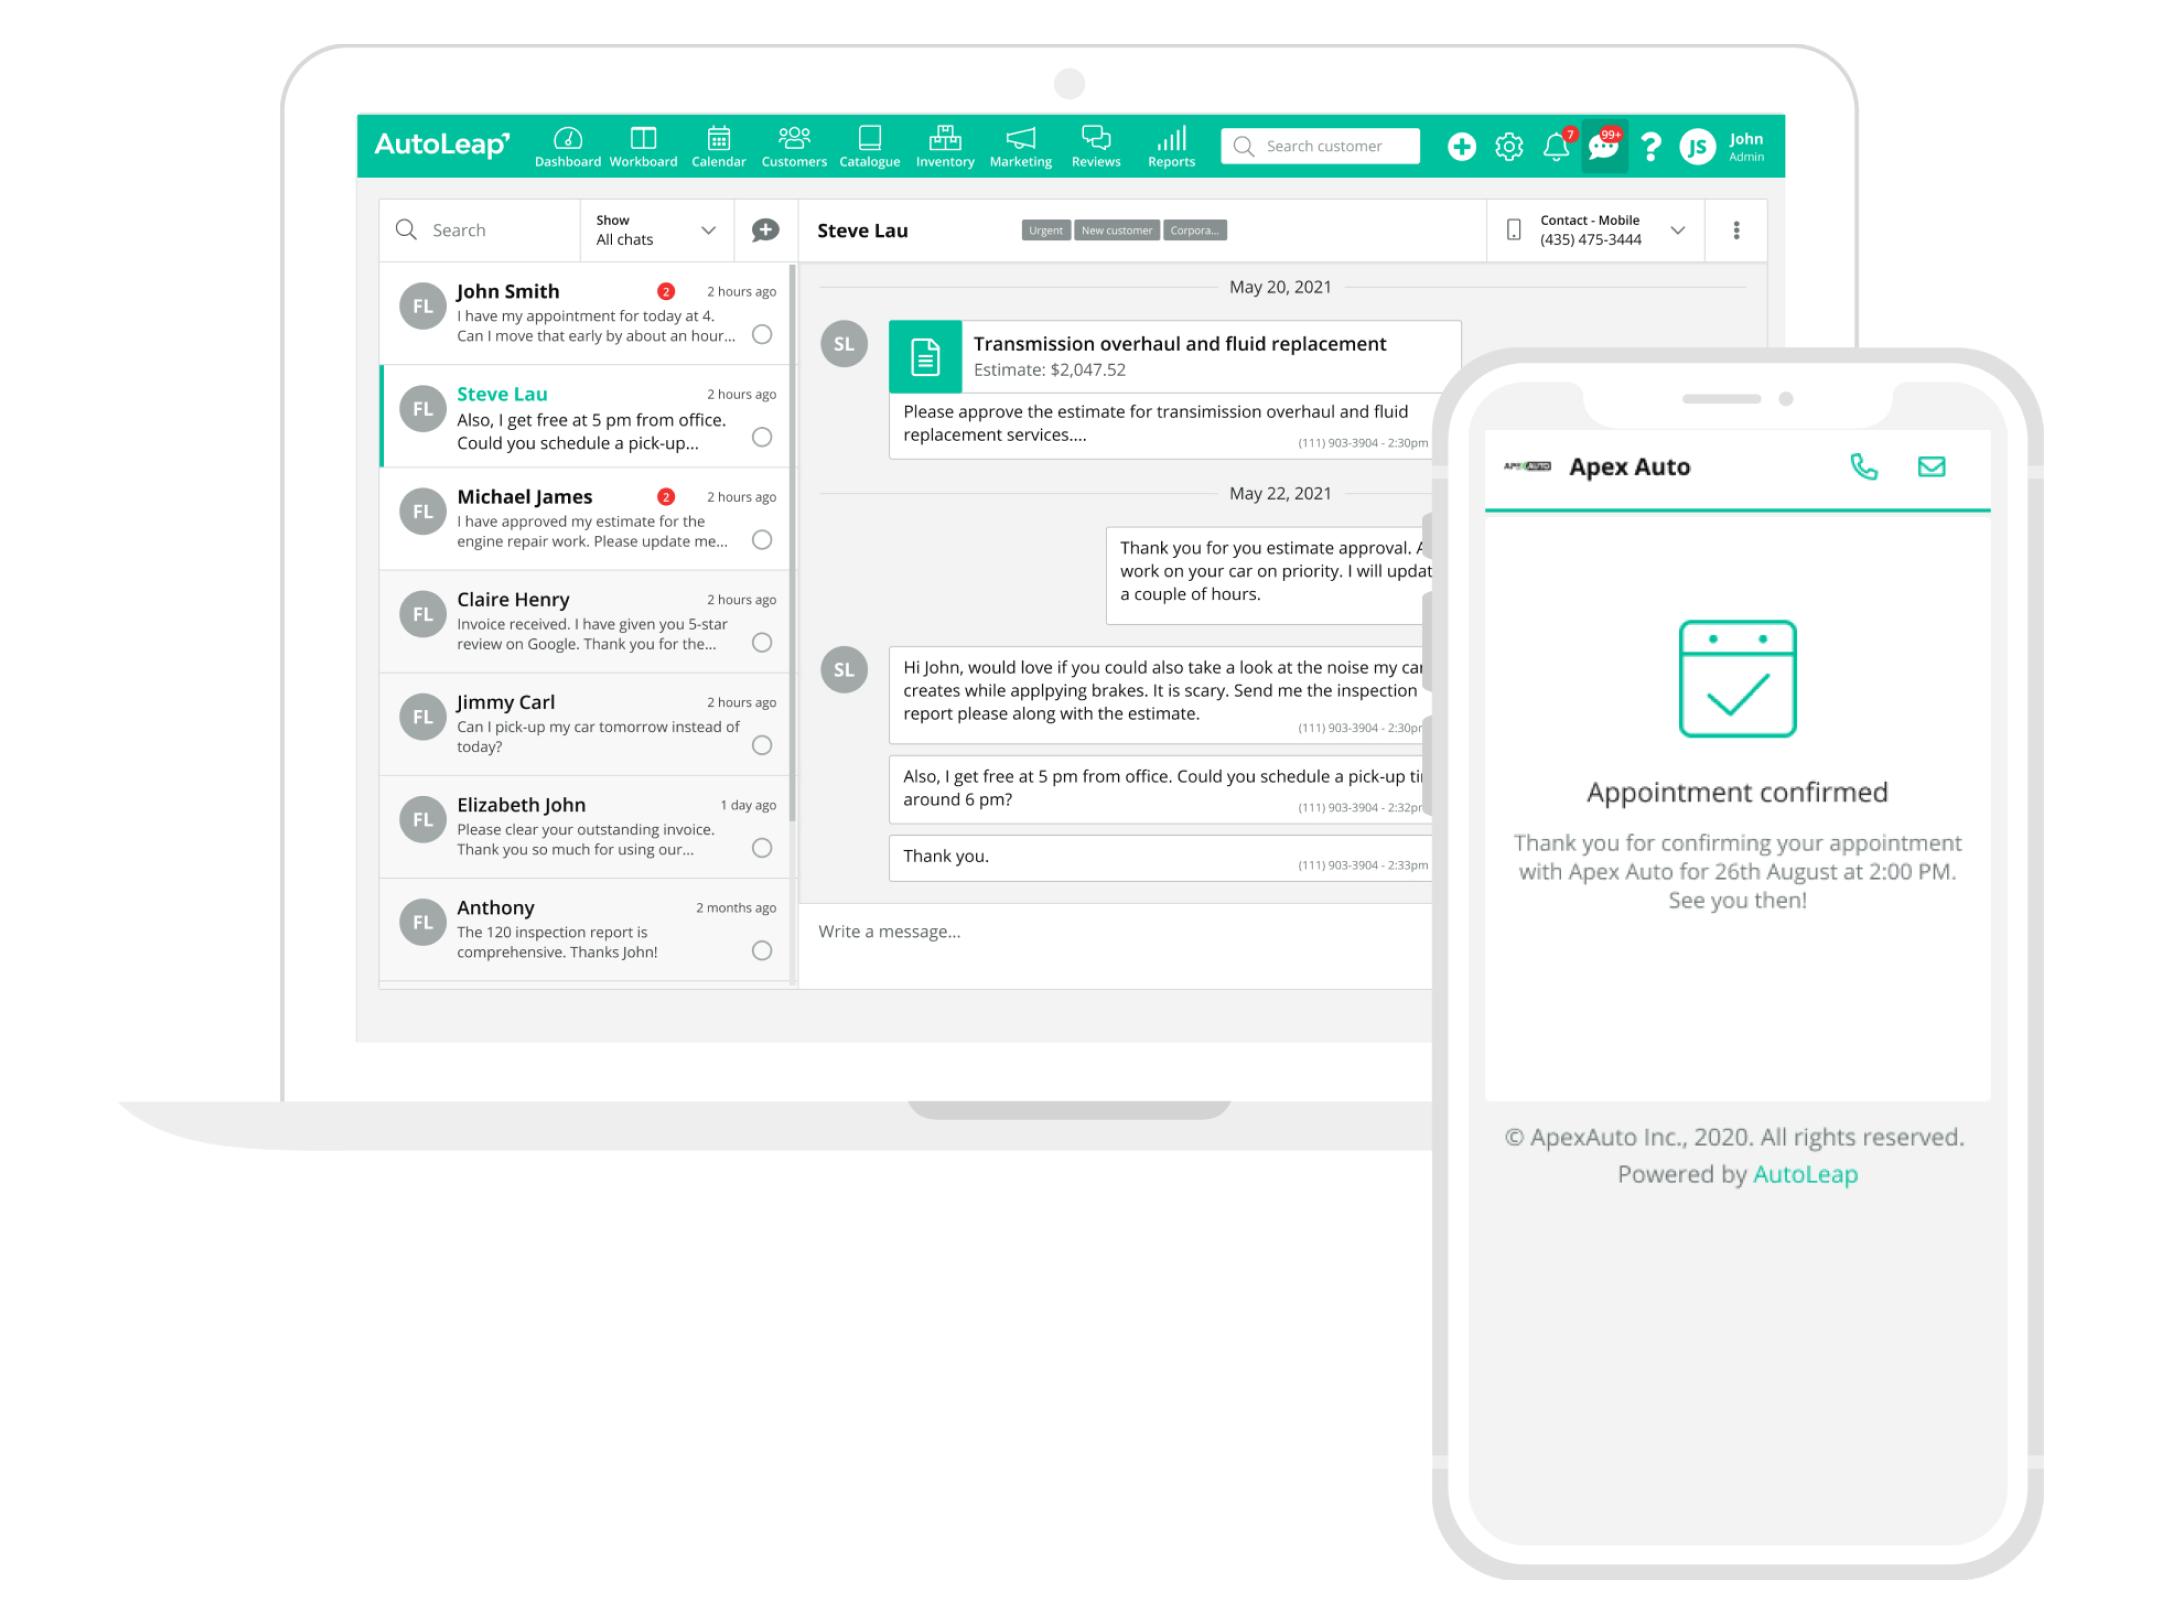 AutoLeap Customer Communication - Reduce No Shows by Send automated appointment reminders to keep upcoming repair visits top of mind. Thus, confirm customer appointments in advance and plan ahead effectively.